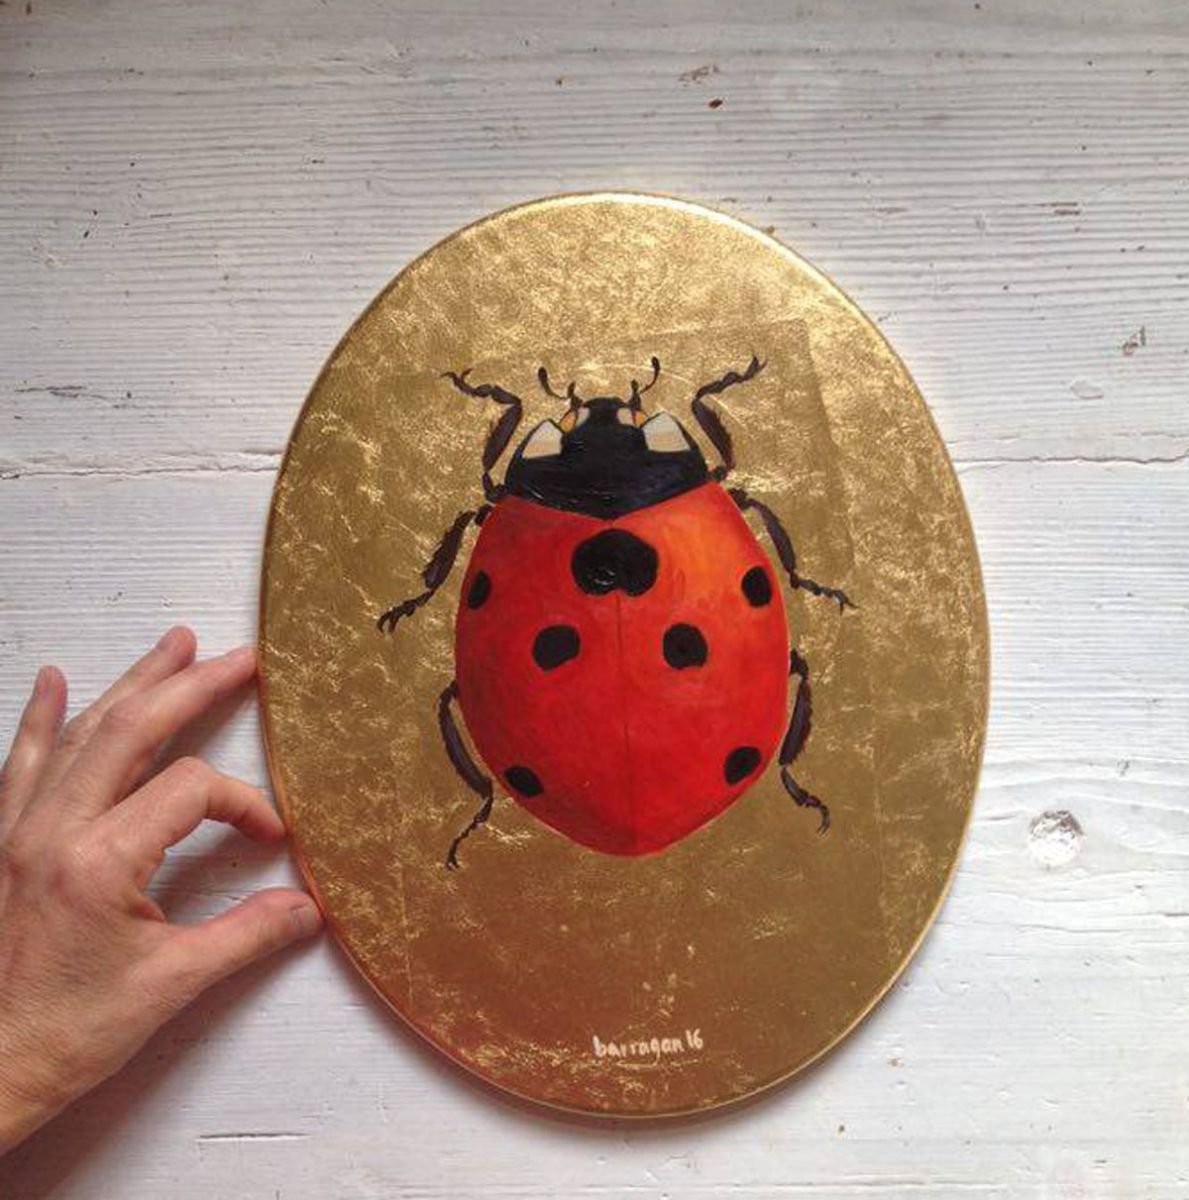 My Big Golden Ladybug Oil Painting on Oval Lacquered Golden Leaf Canvas Frame by Caridad I. Barragan